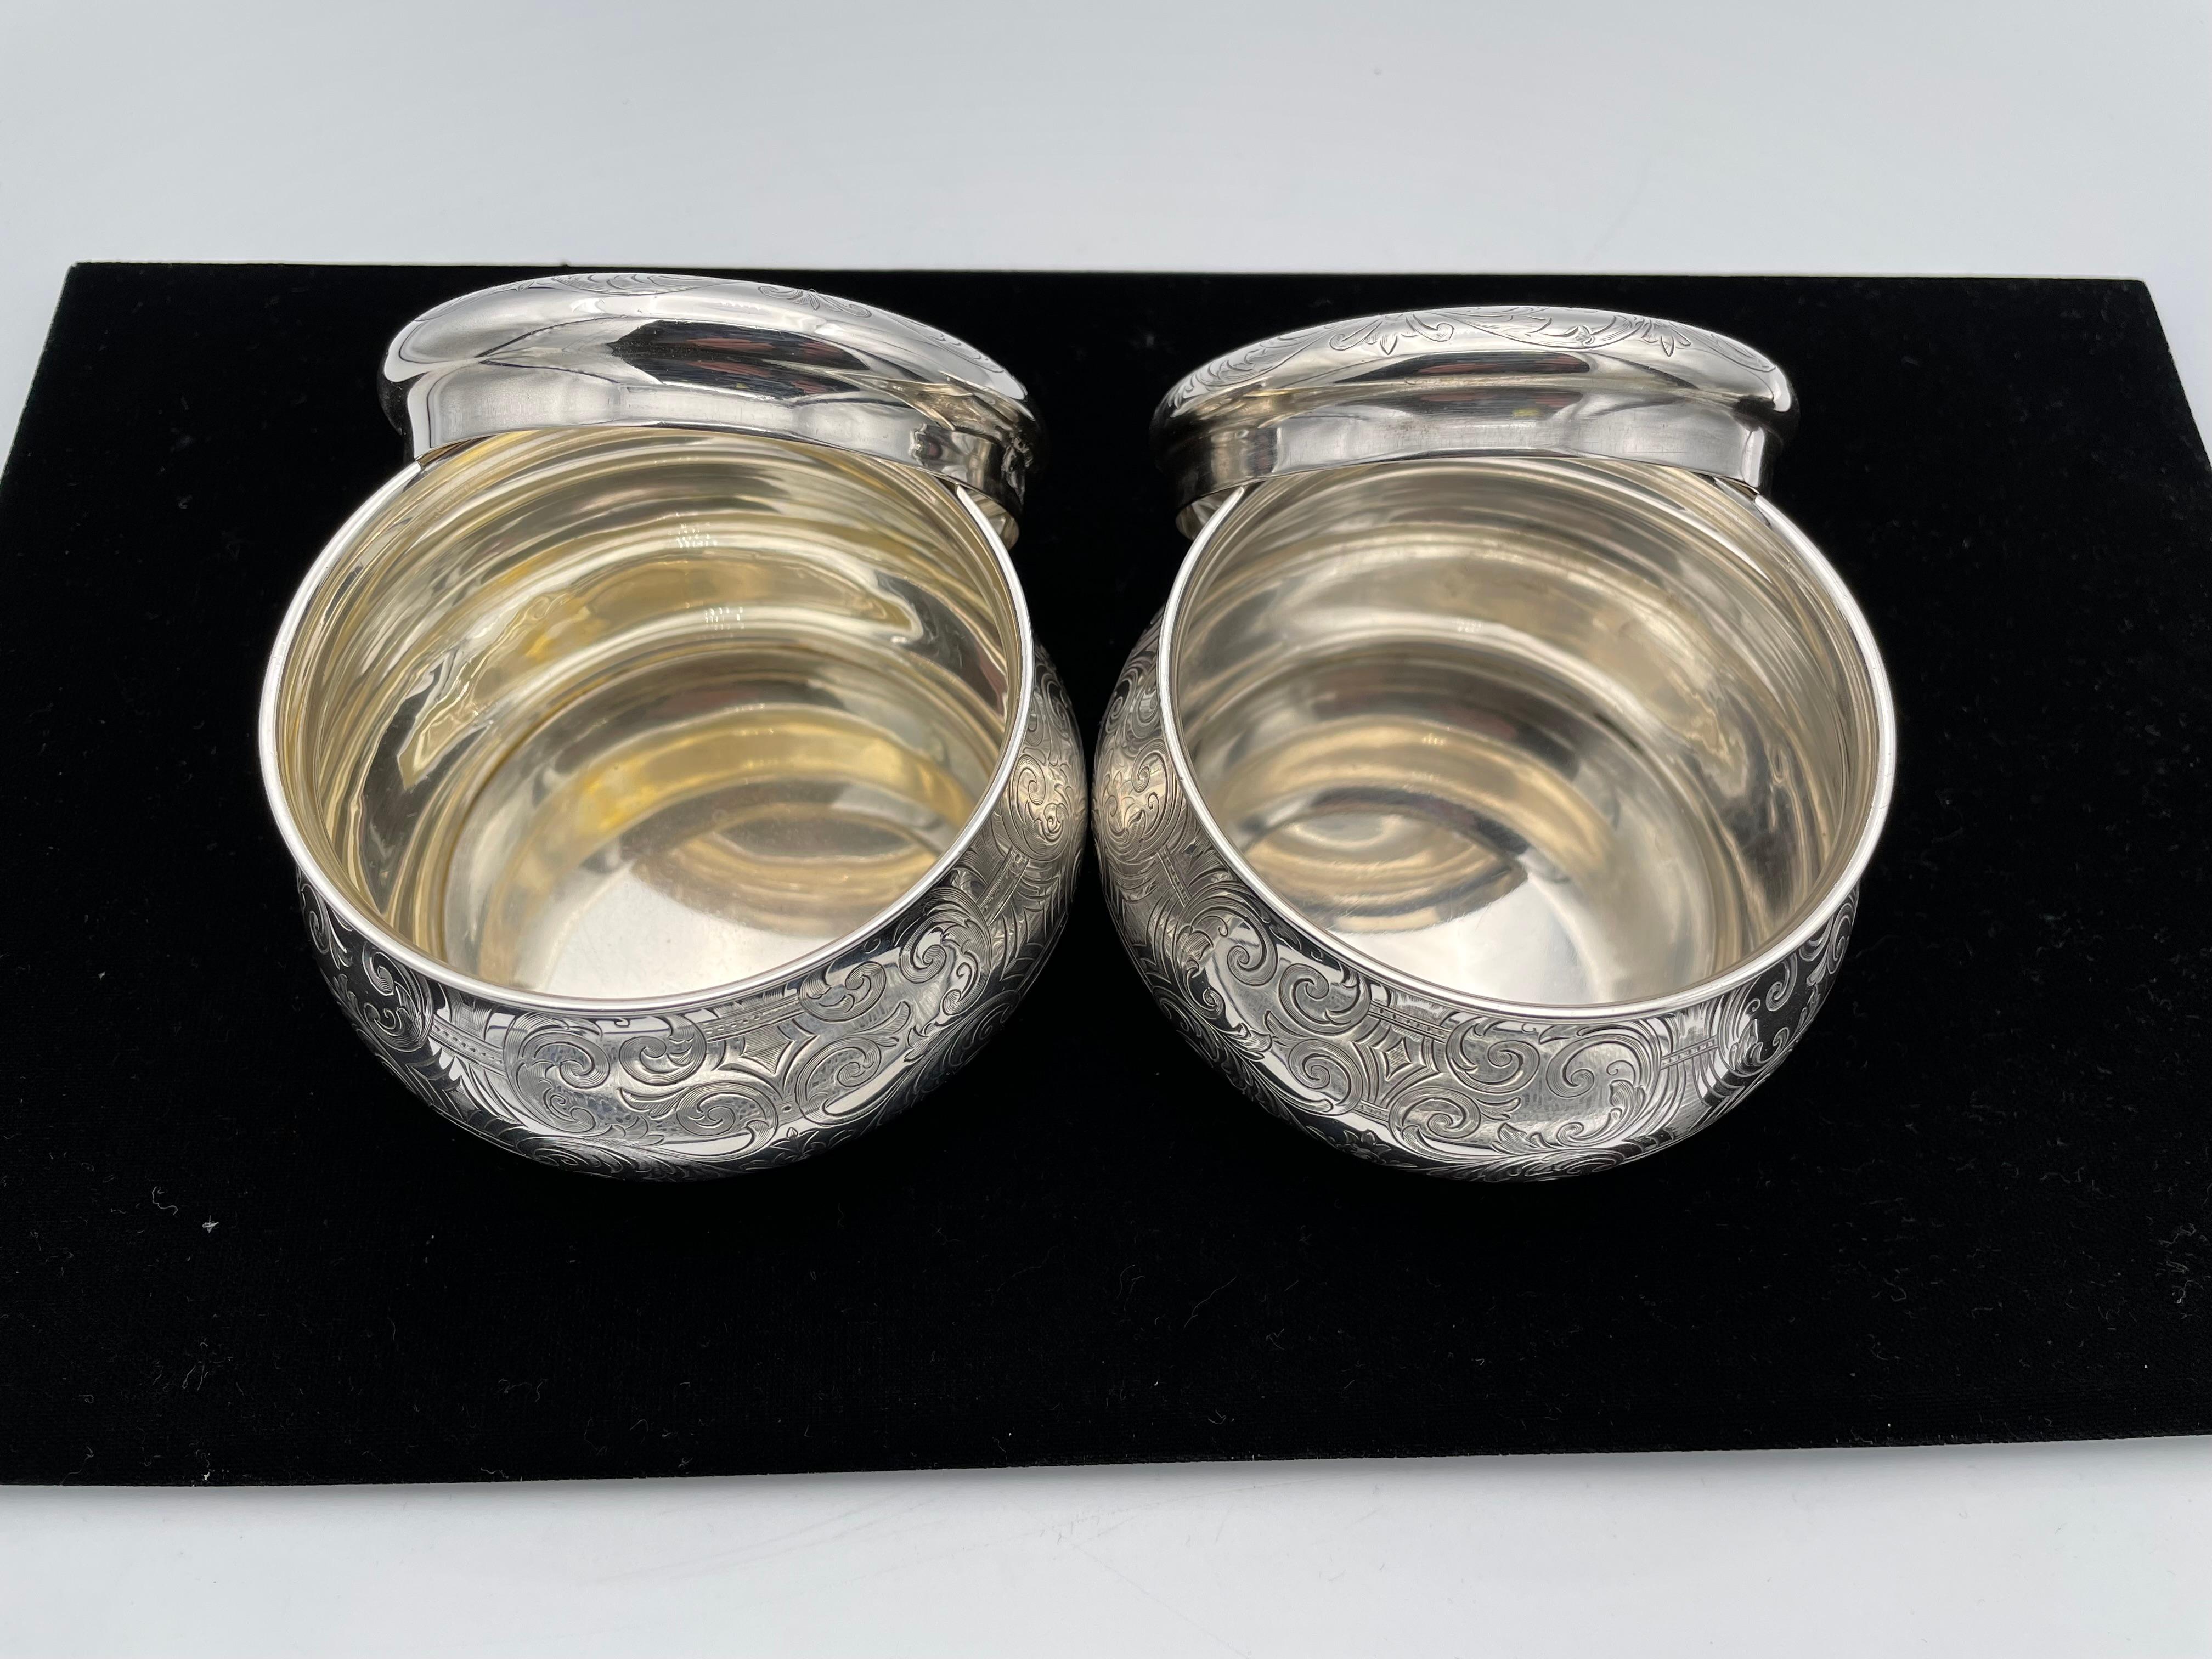 Exquisite pair of large sterling silver vanity jars. Made and signed by TIFFANY & CO. Both jars, one closed and one with an open
top, are gracefully shaped, with small pedestals. Intricate allover deeply engraved pattern. 4